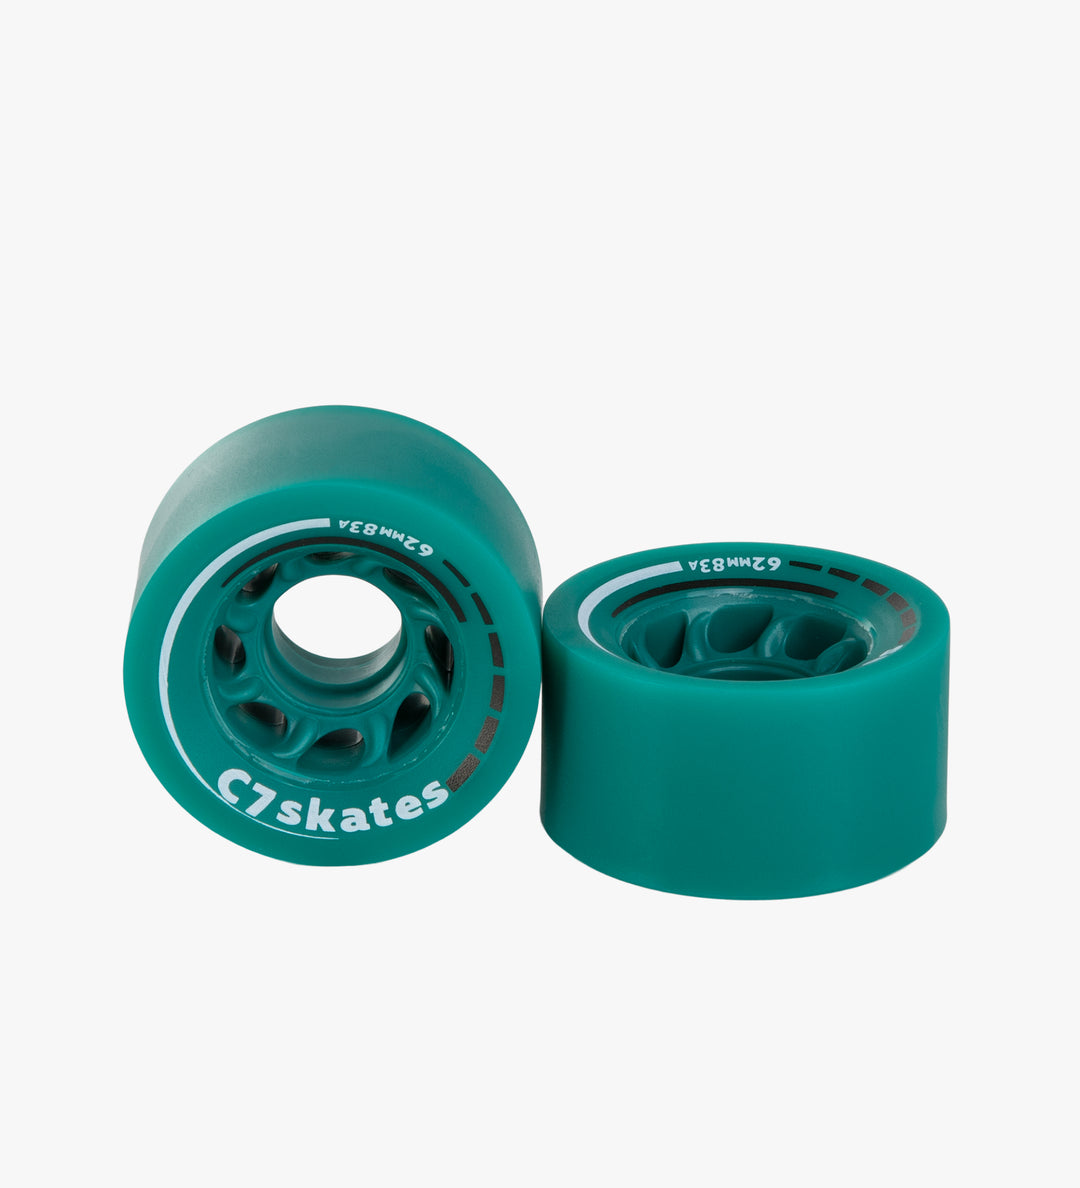 C7skates Enchanted Forest dark green 62mm roller skate wheels made from durable 83A polyurethane 